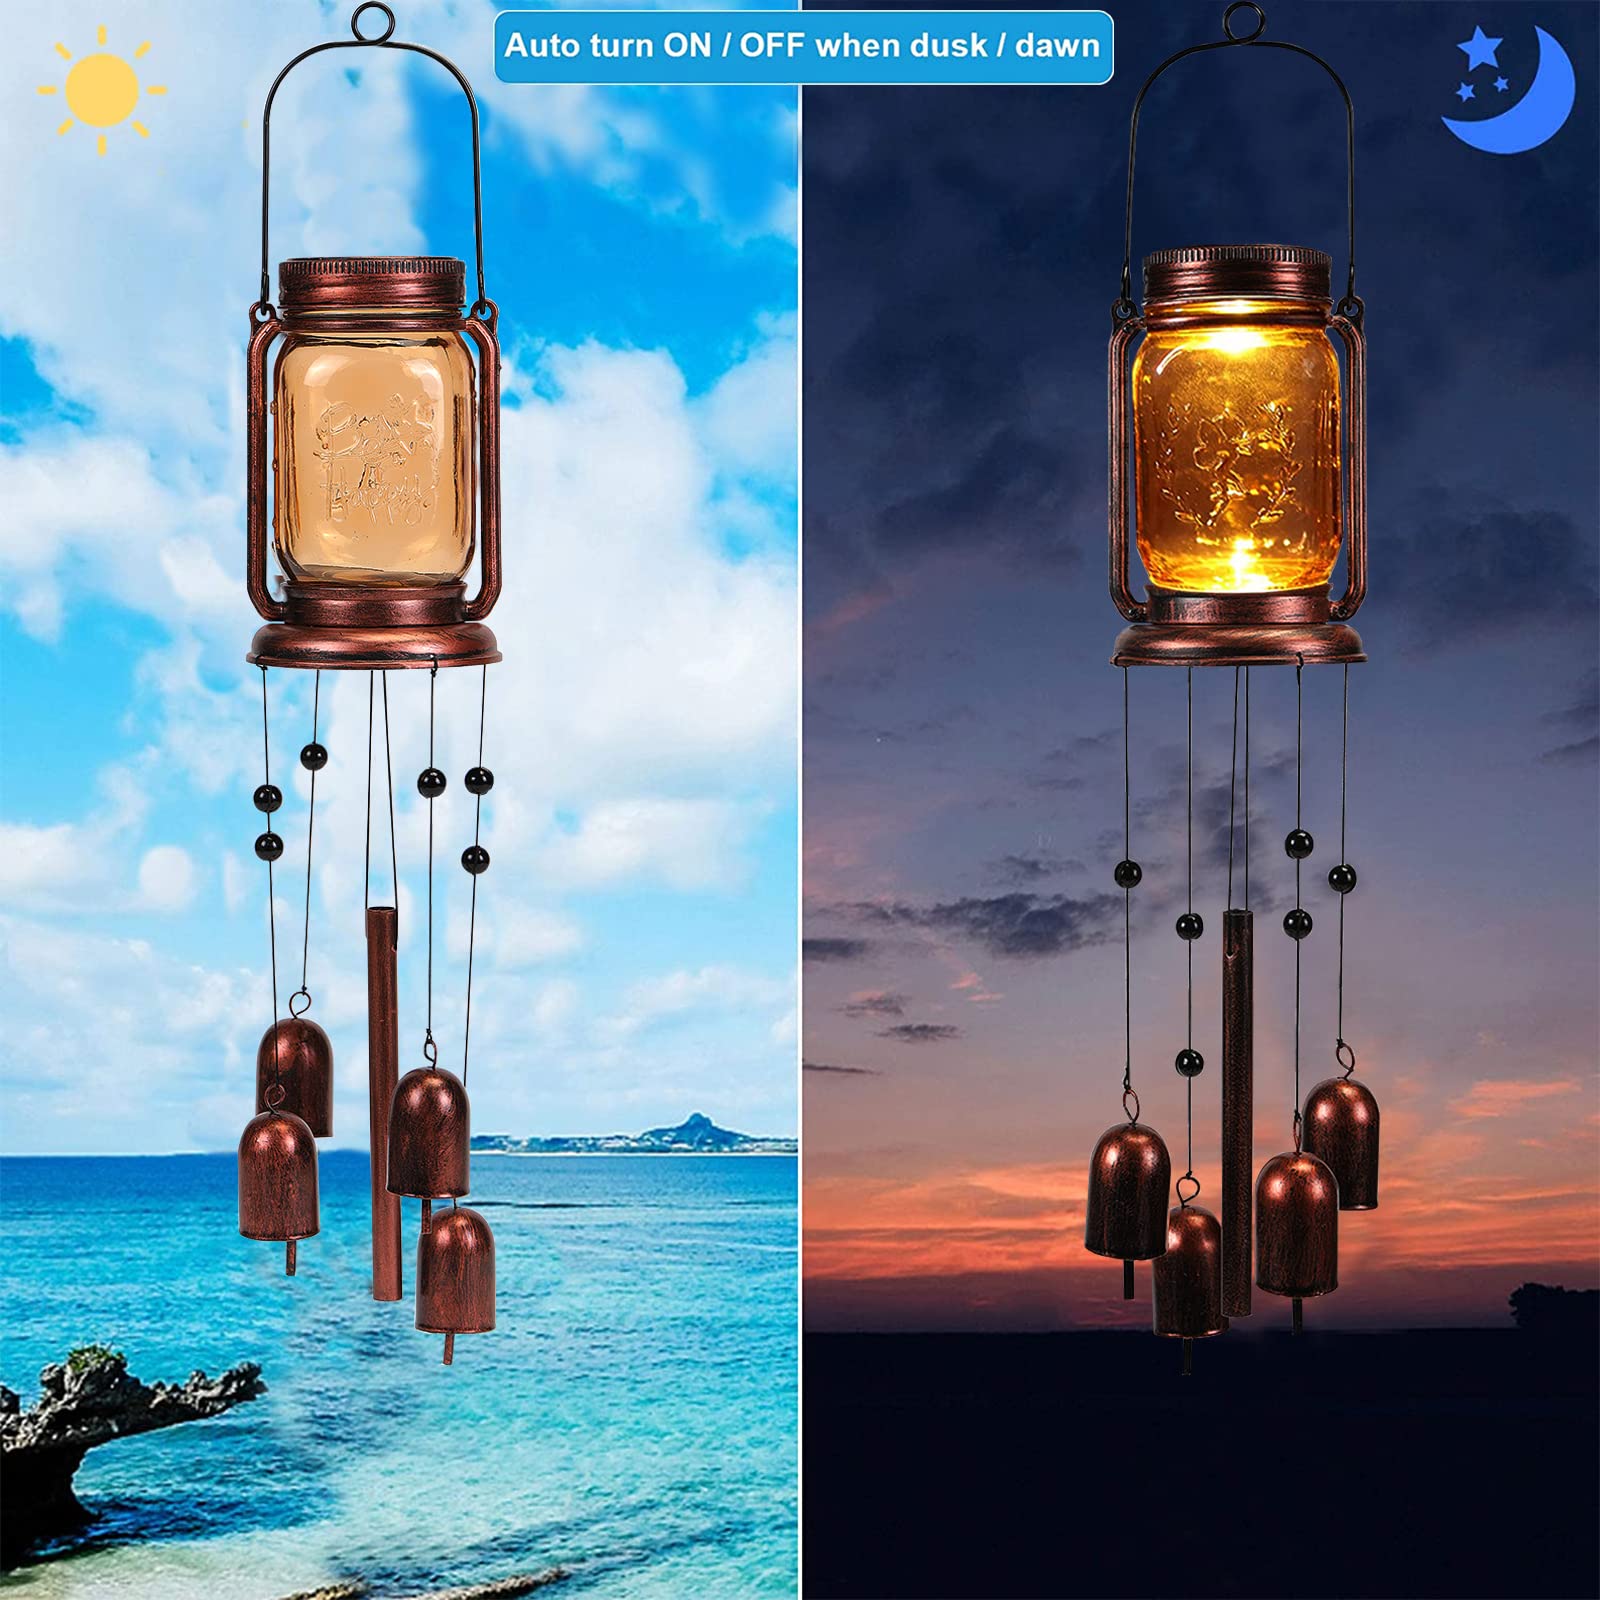 Gthmine Solar Wind Chimes for Outside,Mason Jar Wind Chime Light,Waterproof Windchimes for Garden,Patio Decor,Memorial Wind Chimes,Birthday Gift for Mom,Wife,Grandma,Neighbors (2 Pack)